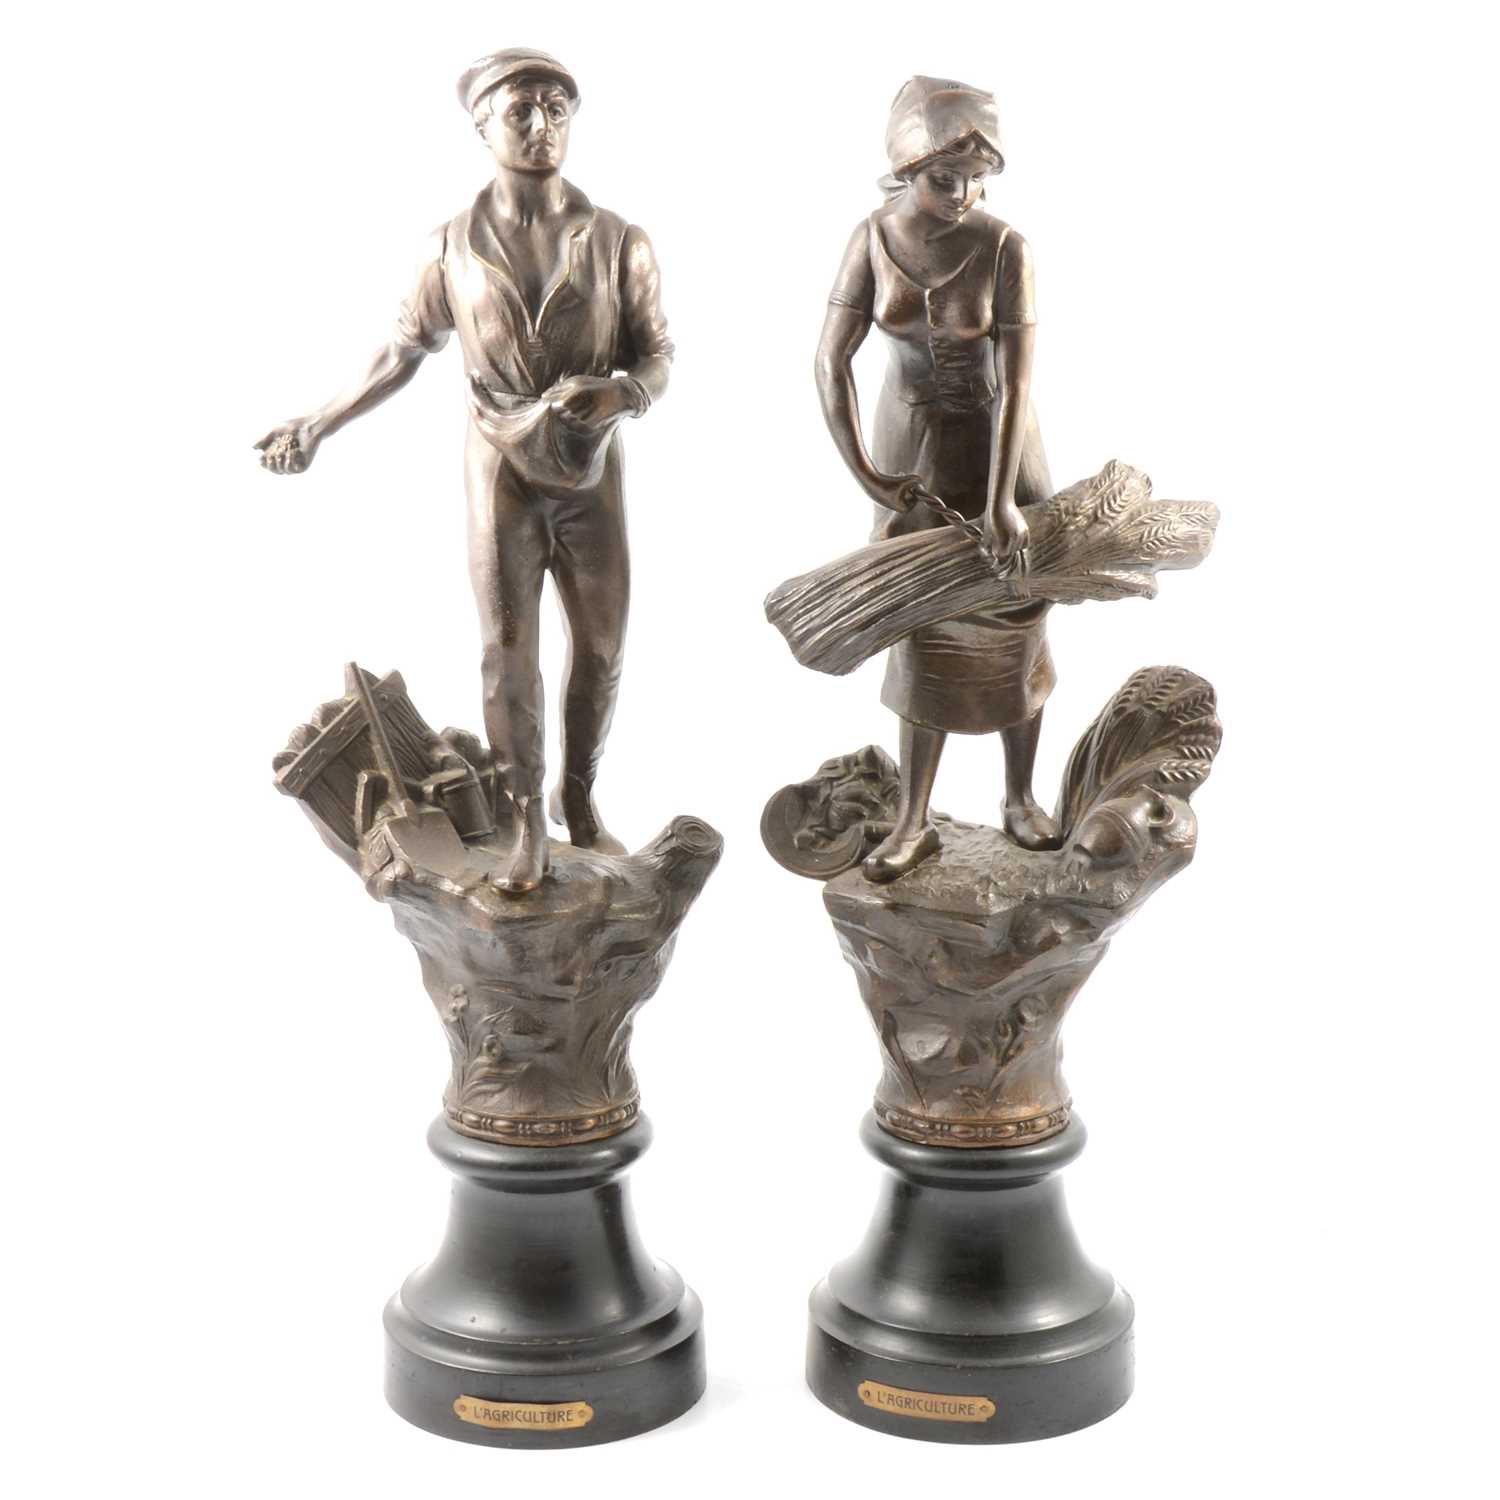 Lot 74 - Pair of French bronzed spelter figures, L'Agriculture